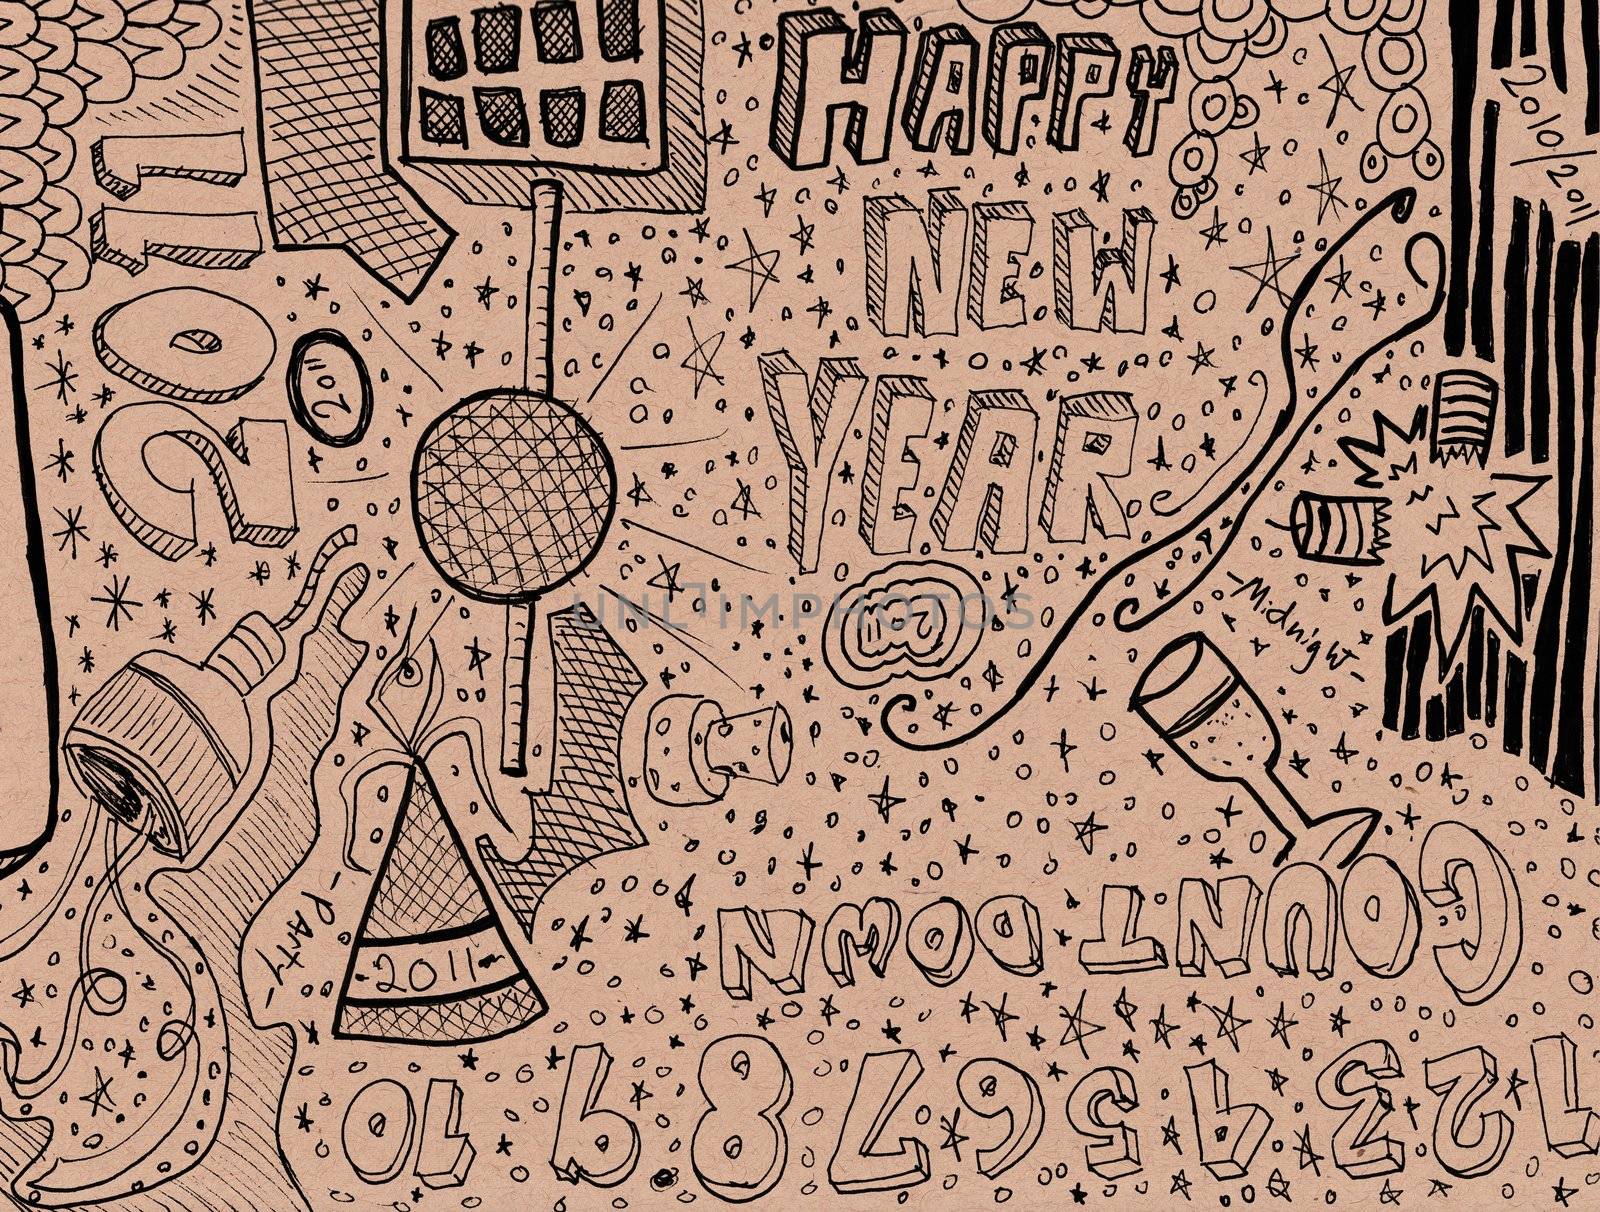 Happy New Year Doodle by jeremywhat